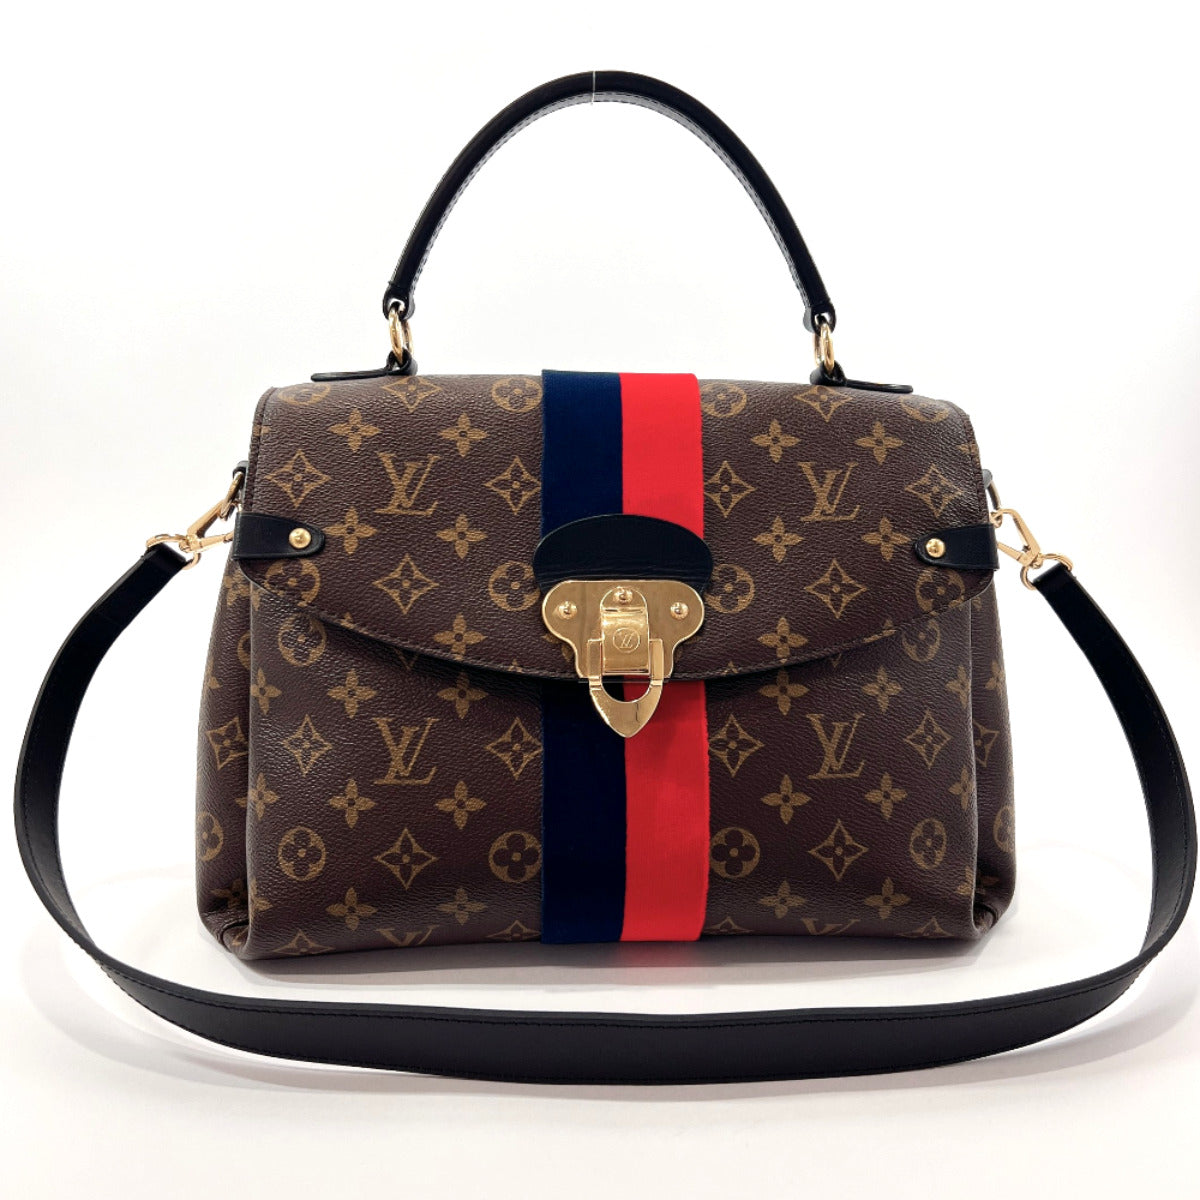 brown and red louis vuitton bag